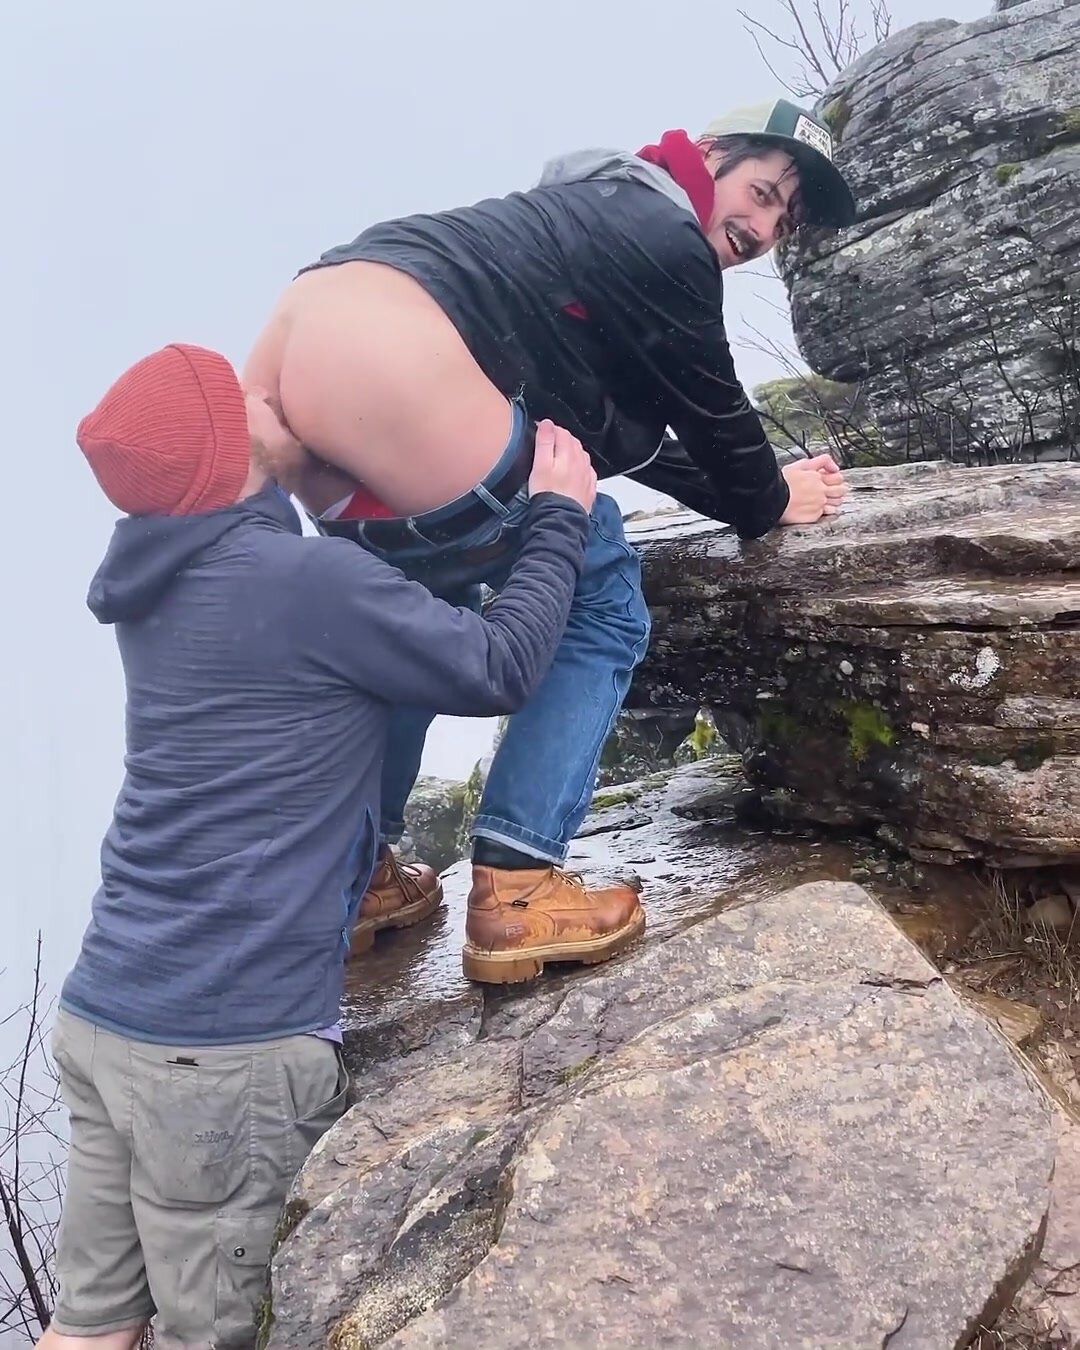 Redneck guy gets rimmed outdoors in the cold by his bro